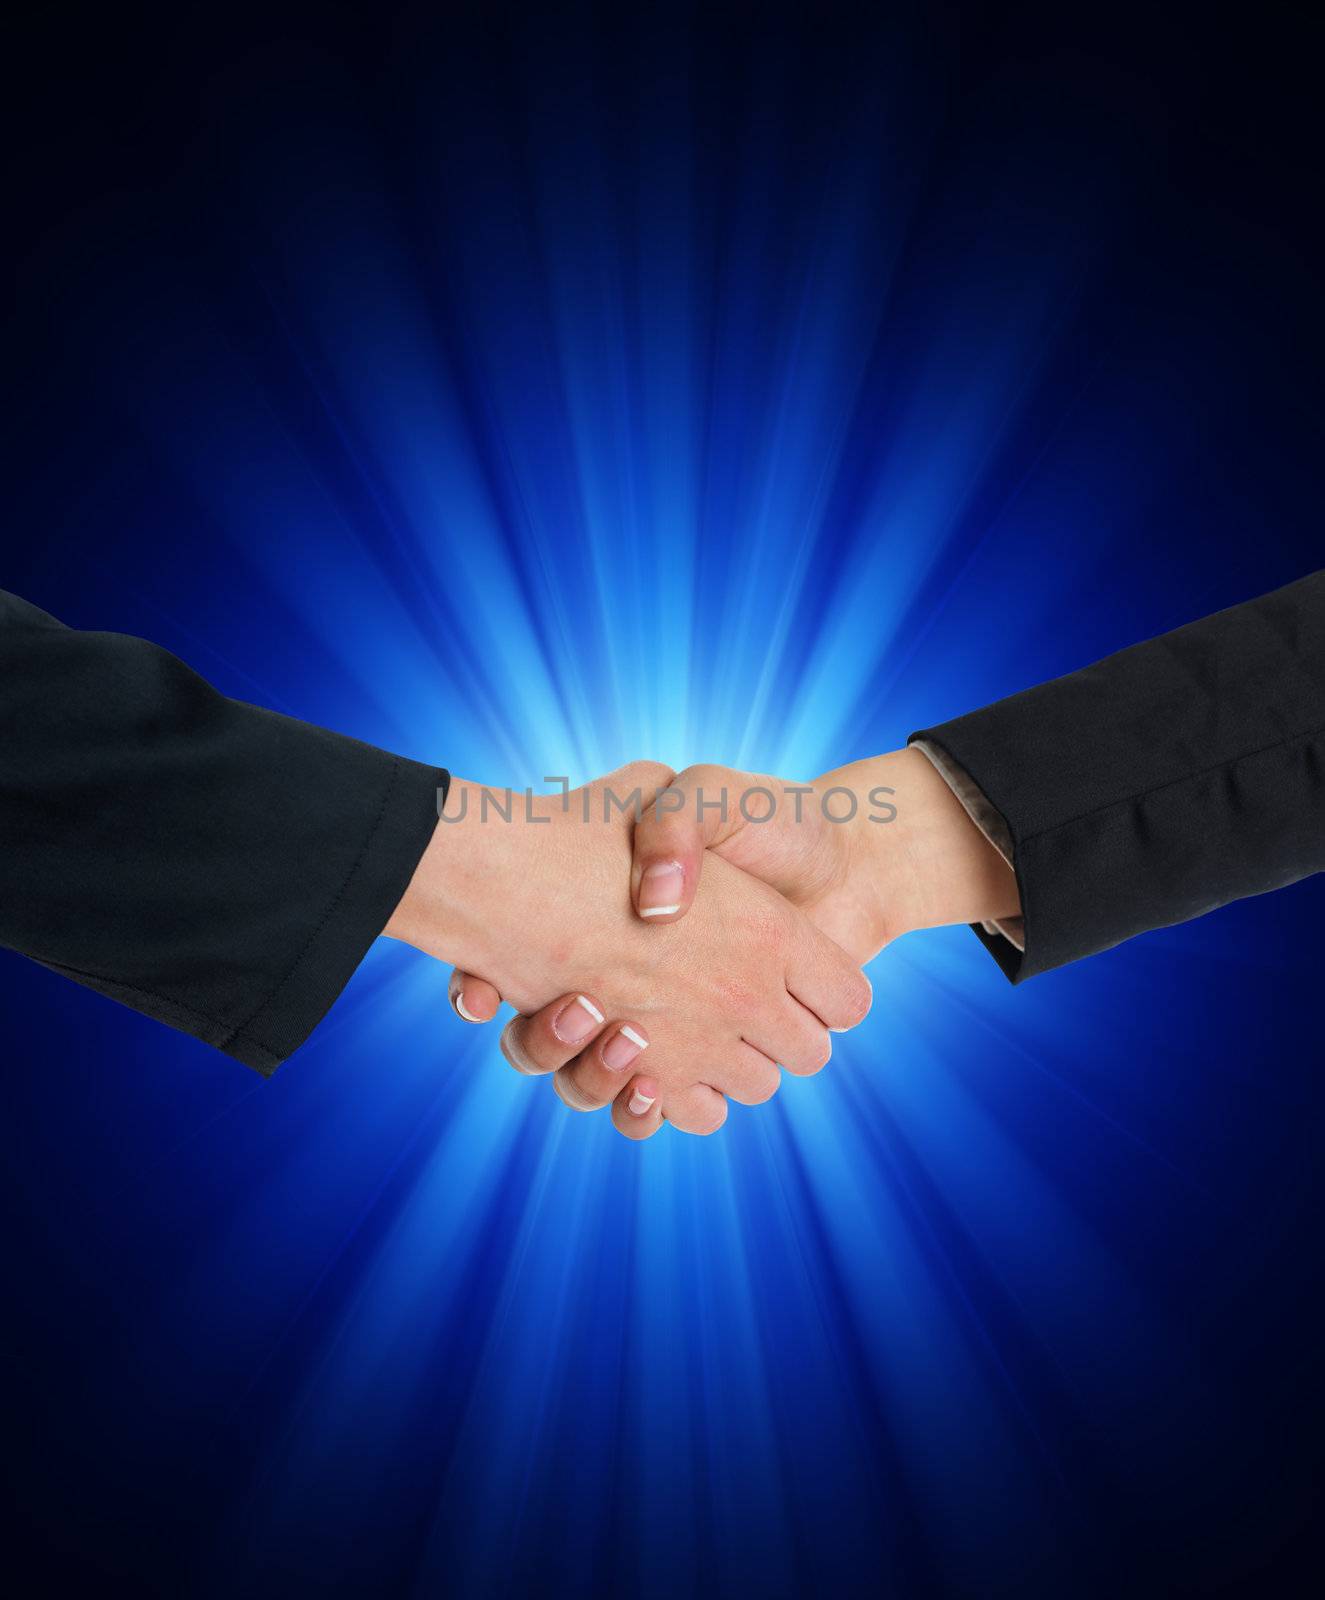 Handshaking in front of blue light by adamr